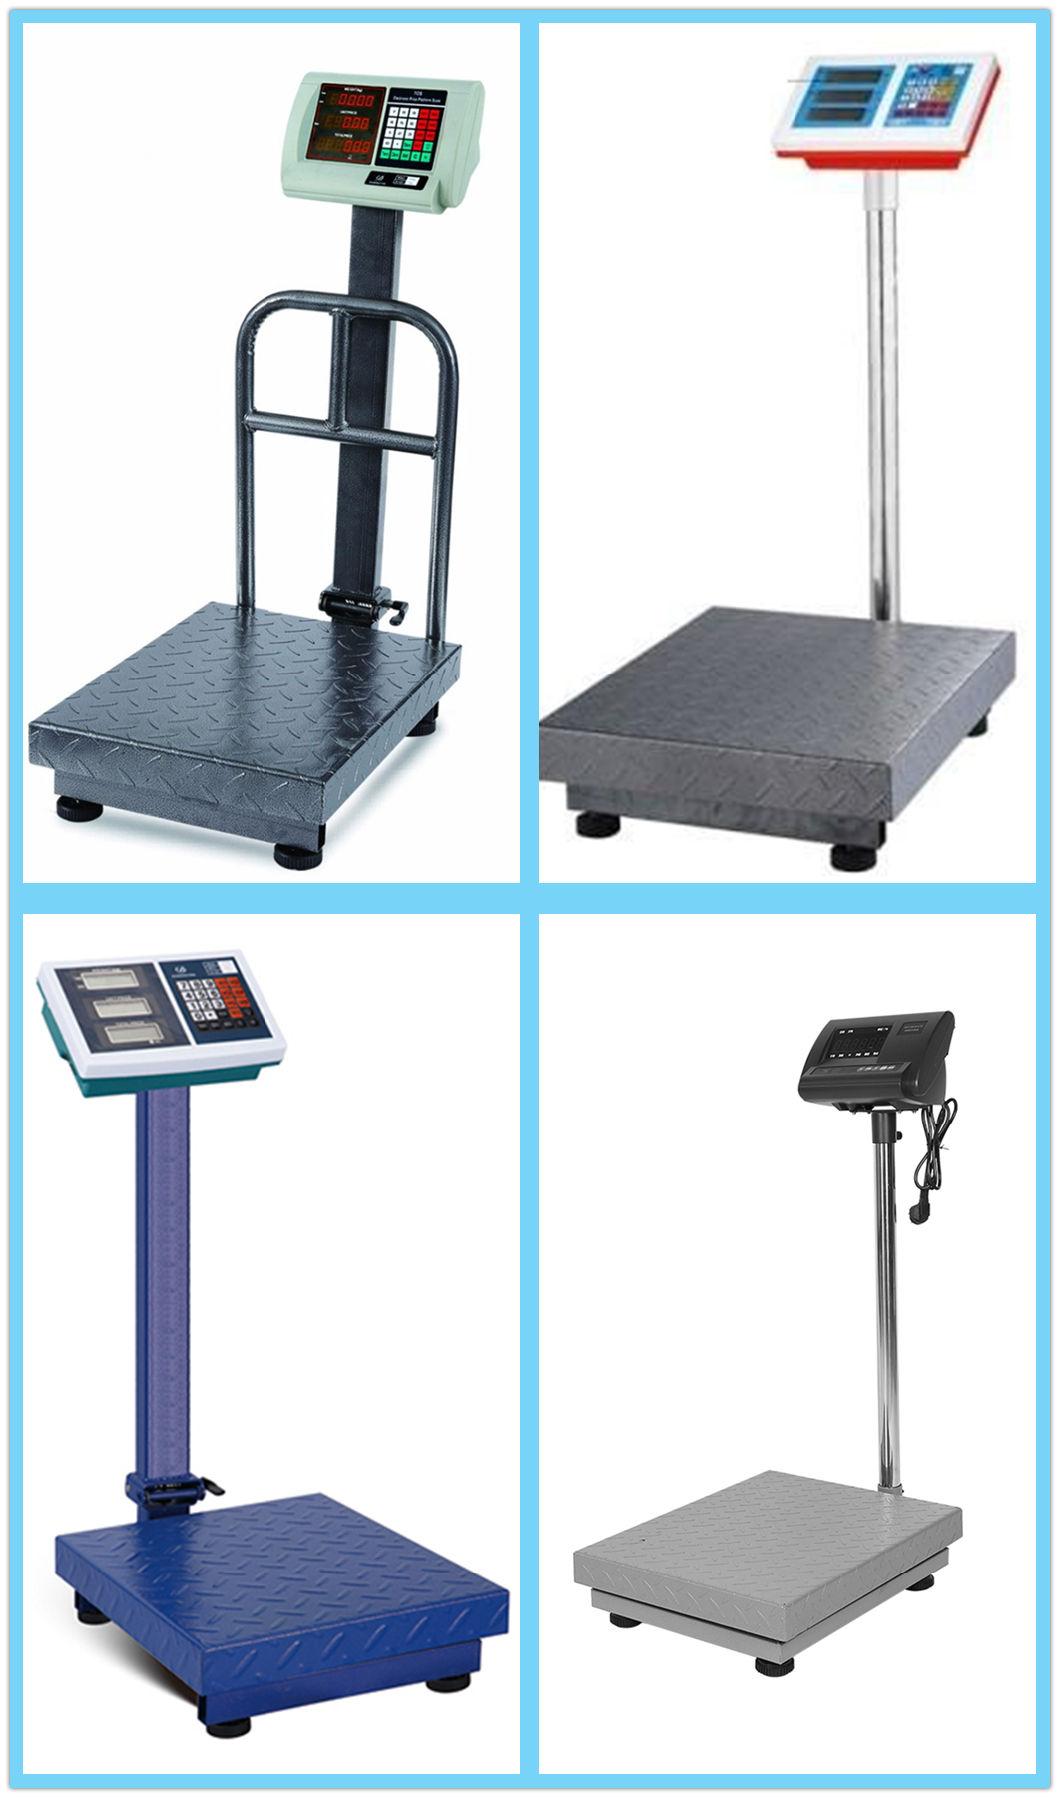 High Quality 400X500mm Stainless Steel LCD Display Industrial Platform Bench Weighing Scale